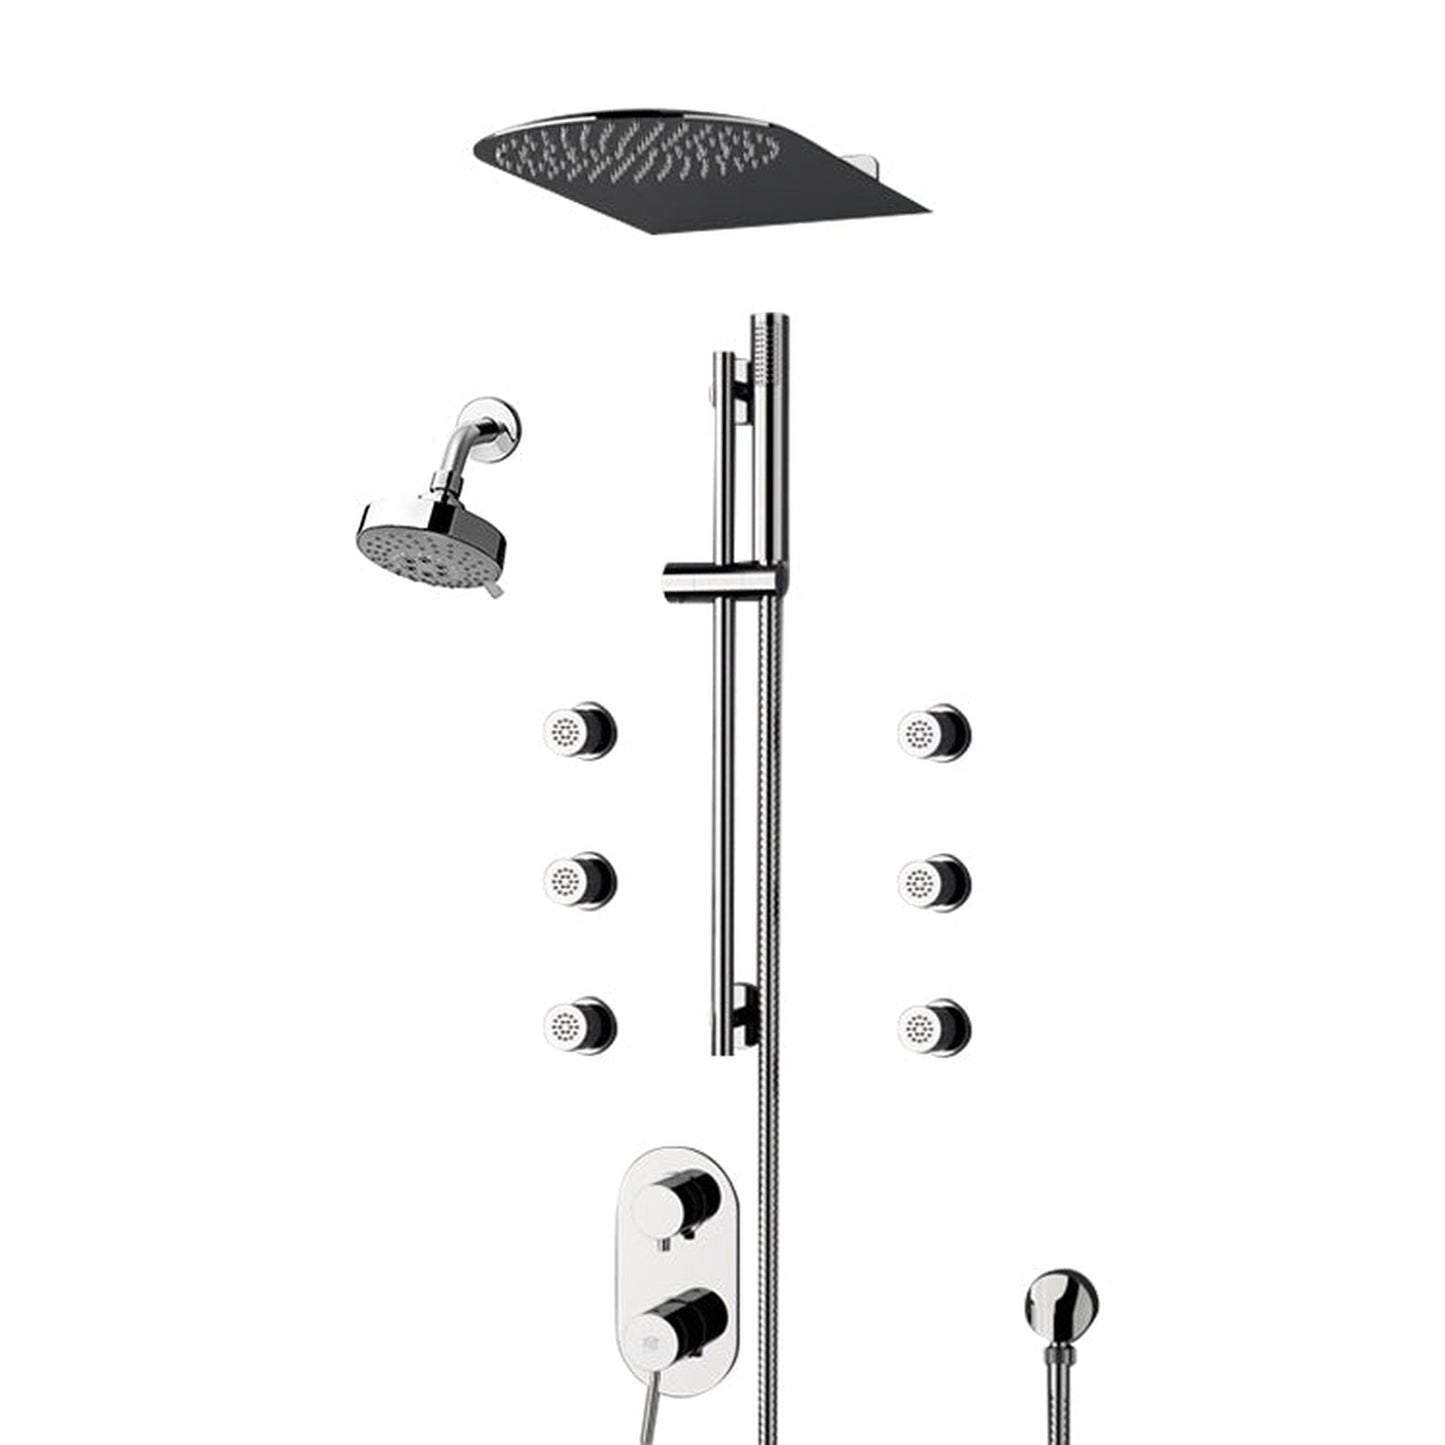 Fontana Deluxe Creative Luxury 8" Chrome Wall-Mounted Dual Shower Head Rainfall Shower System With 6-Jet Sprays and Hand Shower